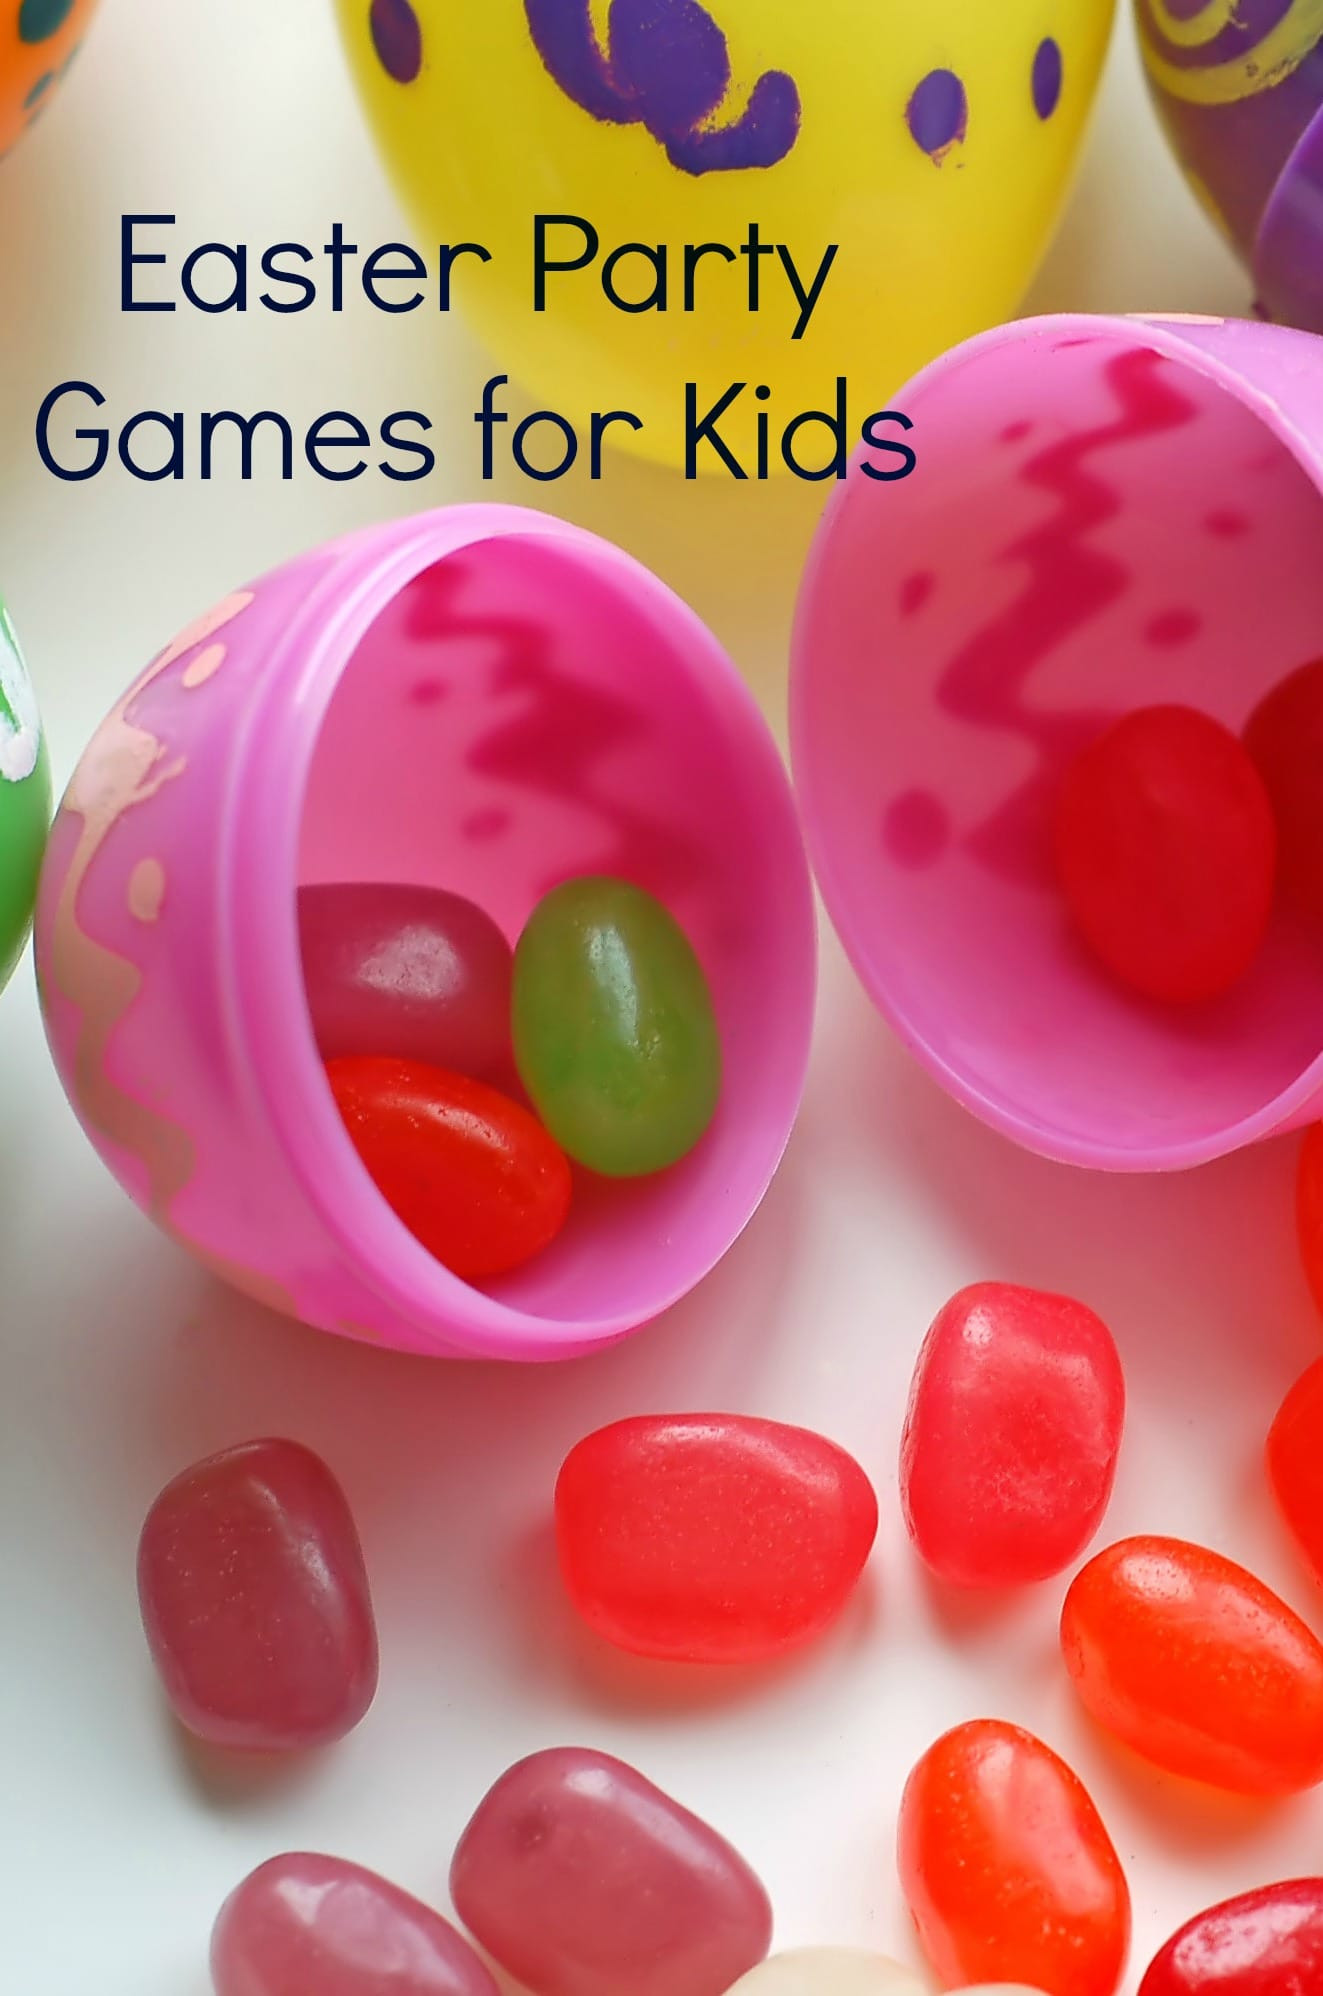 Easter Party Game Ideas Kids
 Easter Party Games for Kids I Like It Frantic